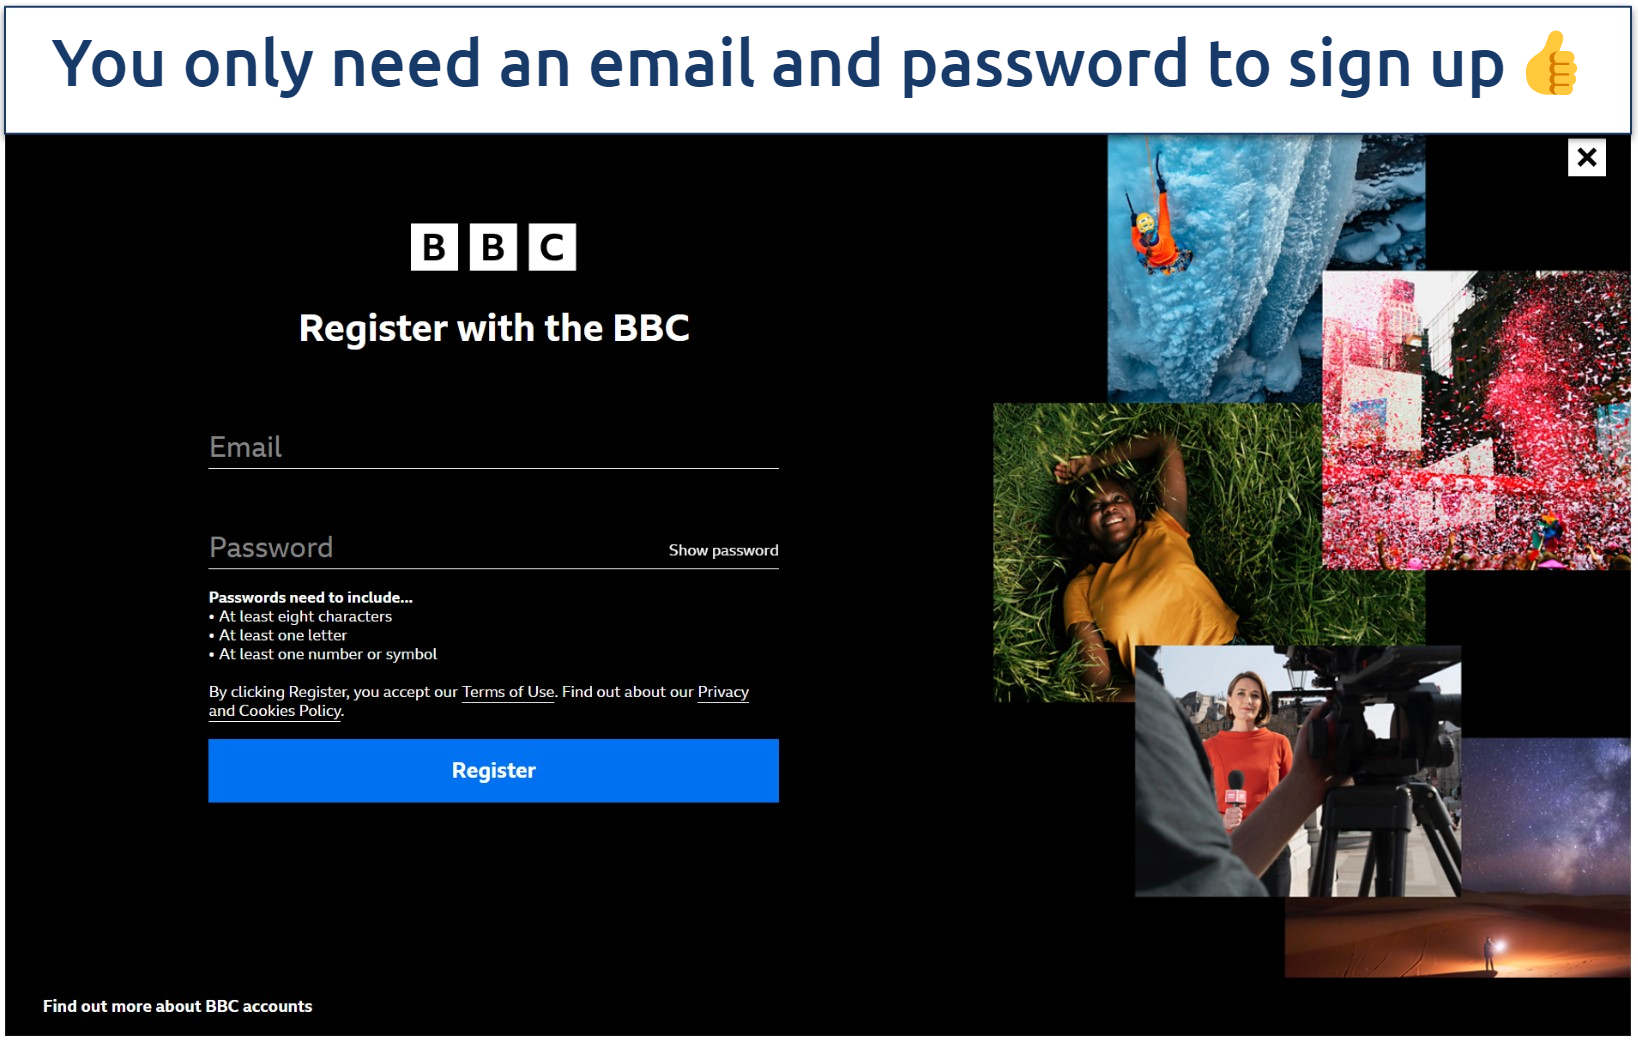 A screenshot of the the BBC iPlayer website home page.